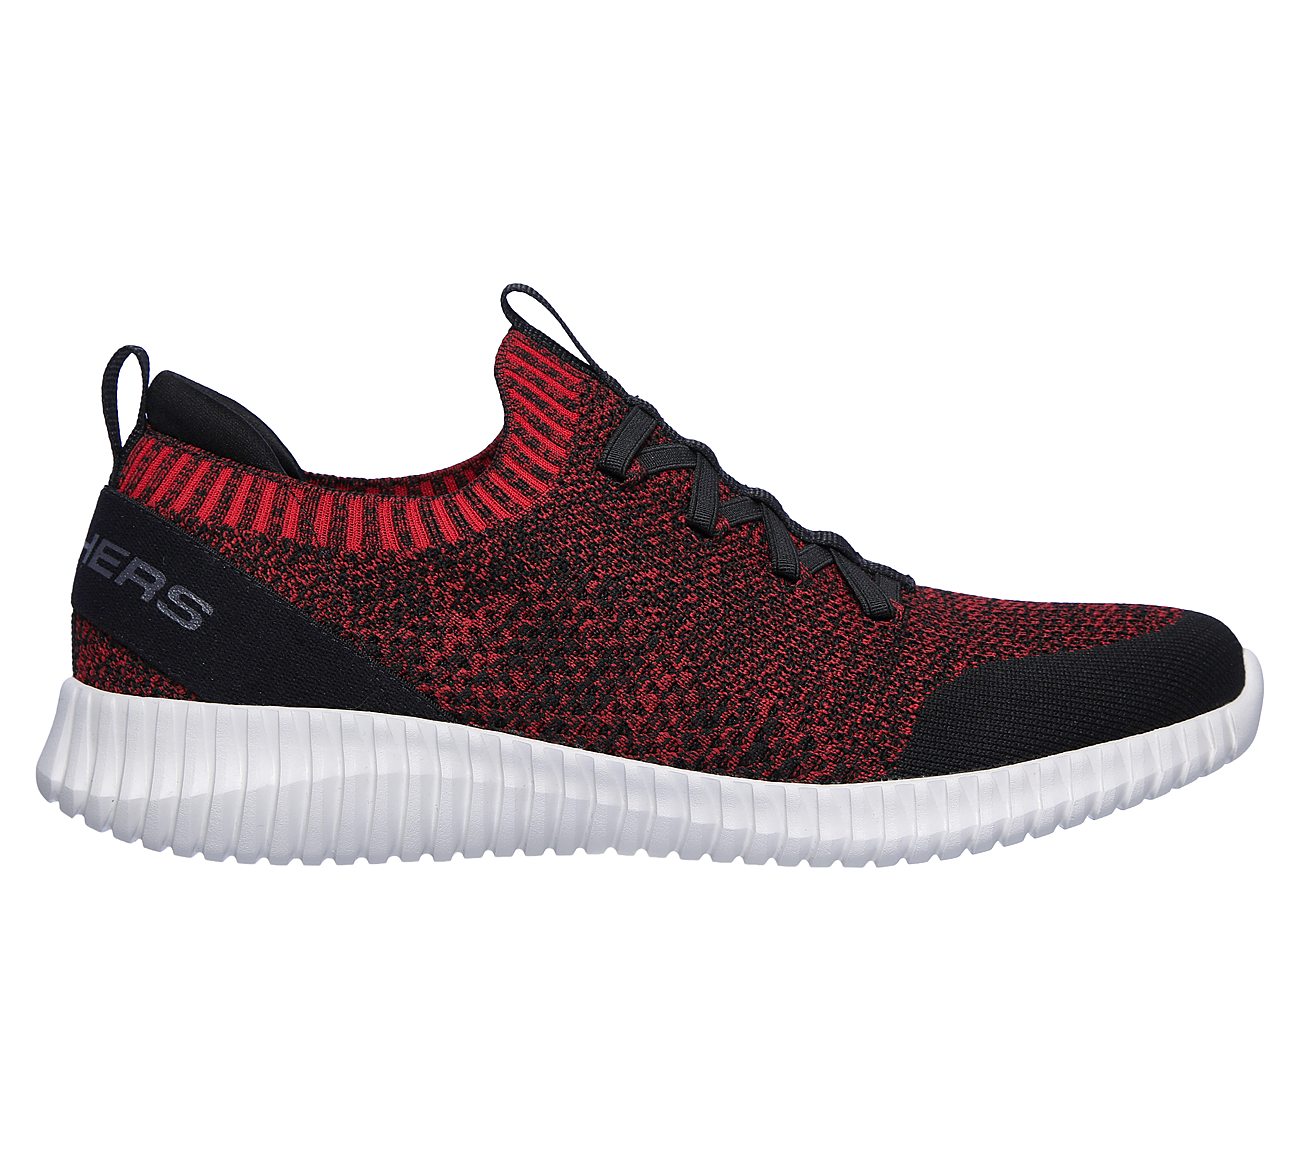 skechers stretch knit red